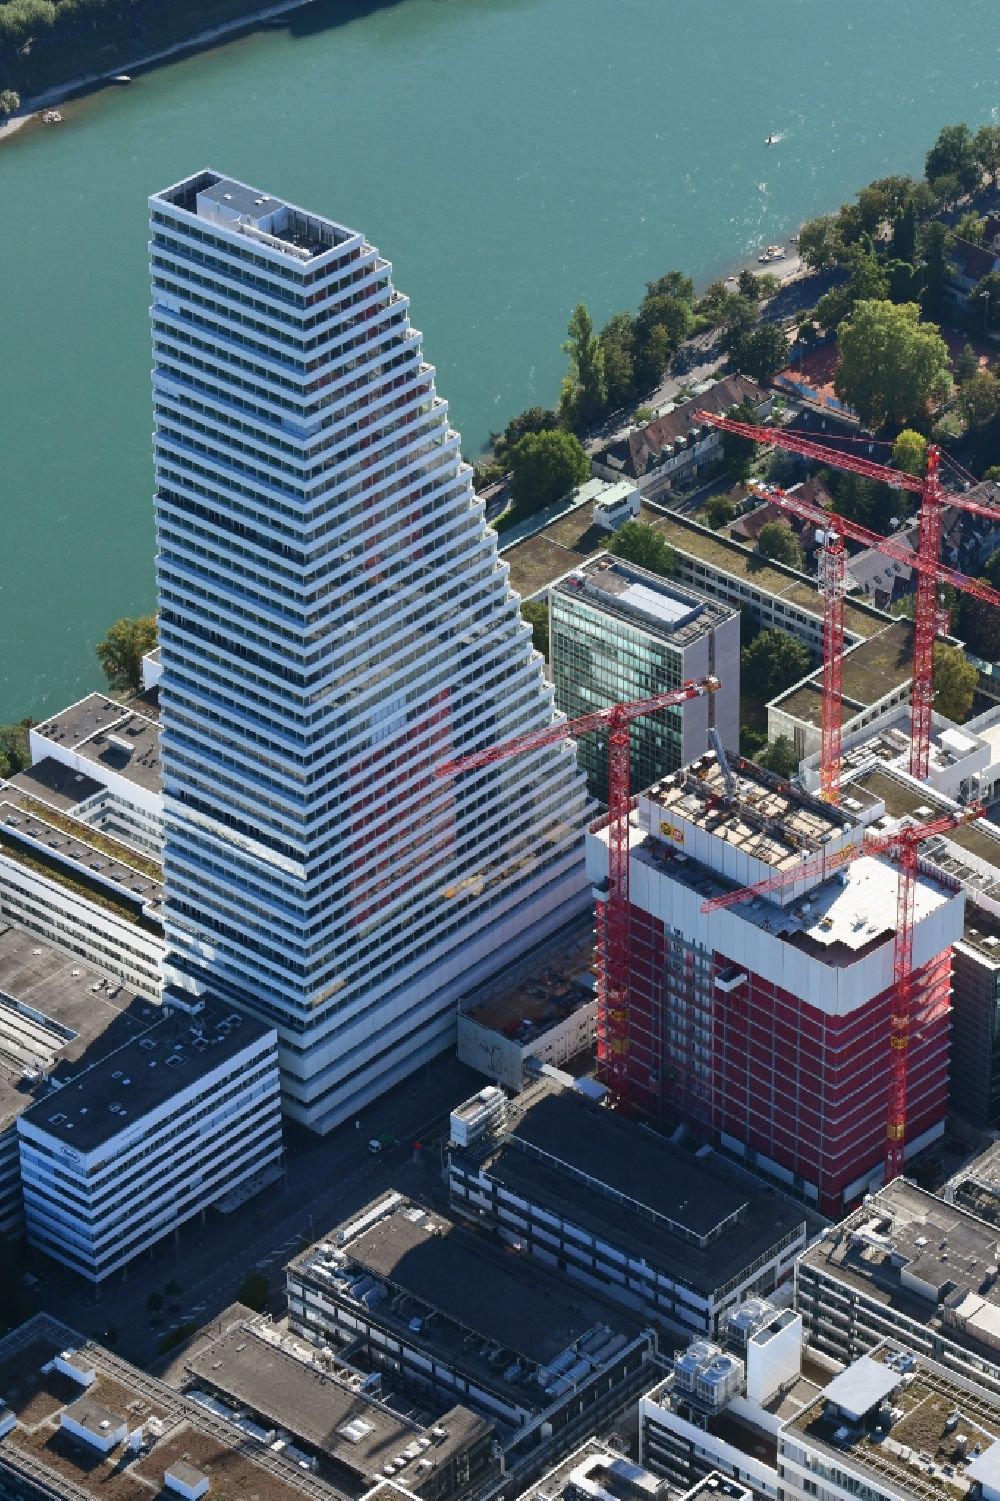 Basel from above - Extension construction sites on the premises of the pharmaceutical company Roche with the cityscape-defining high-rise building in Basel in Switzerland. Construction works for the second tower are visible